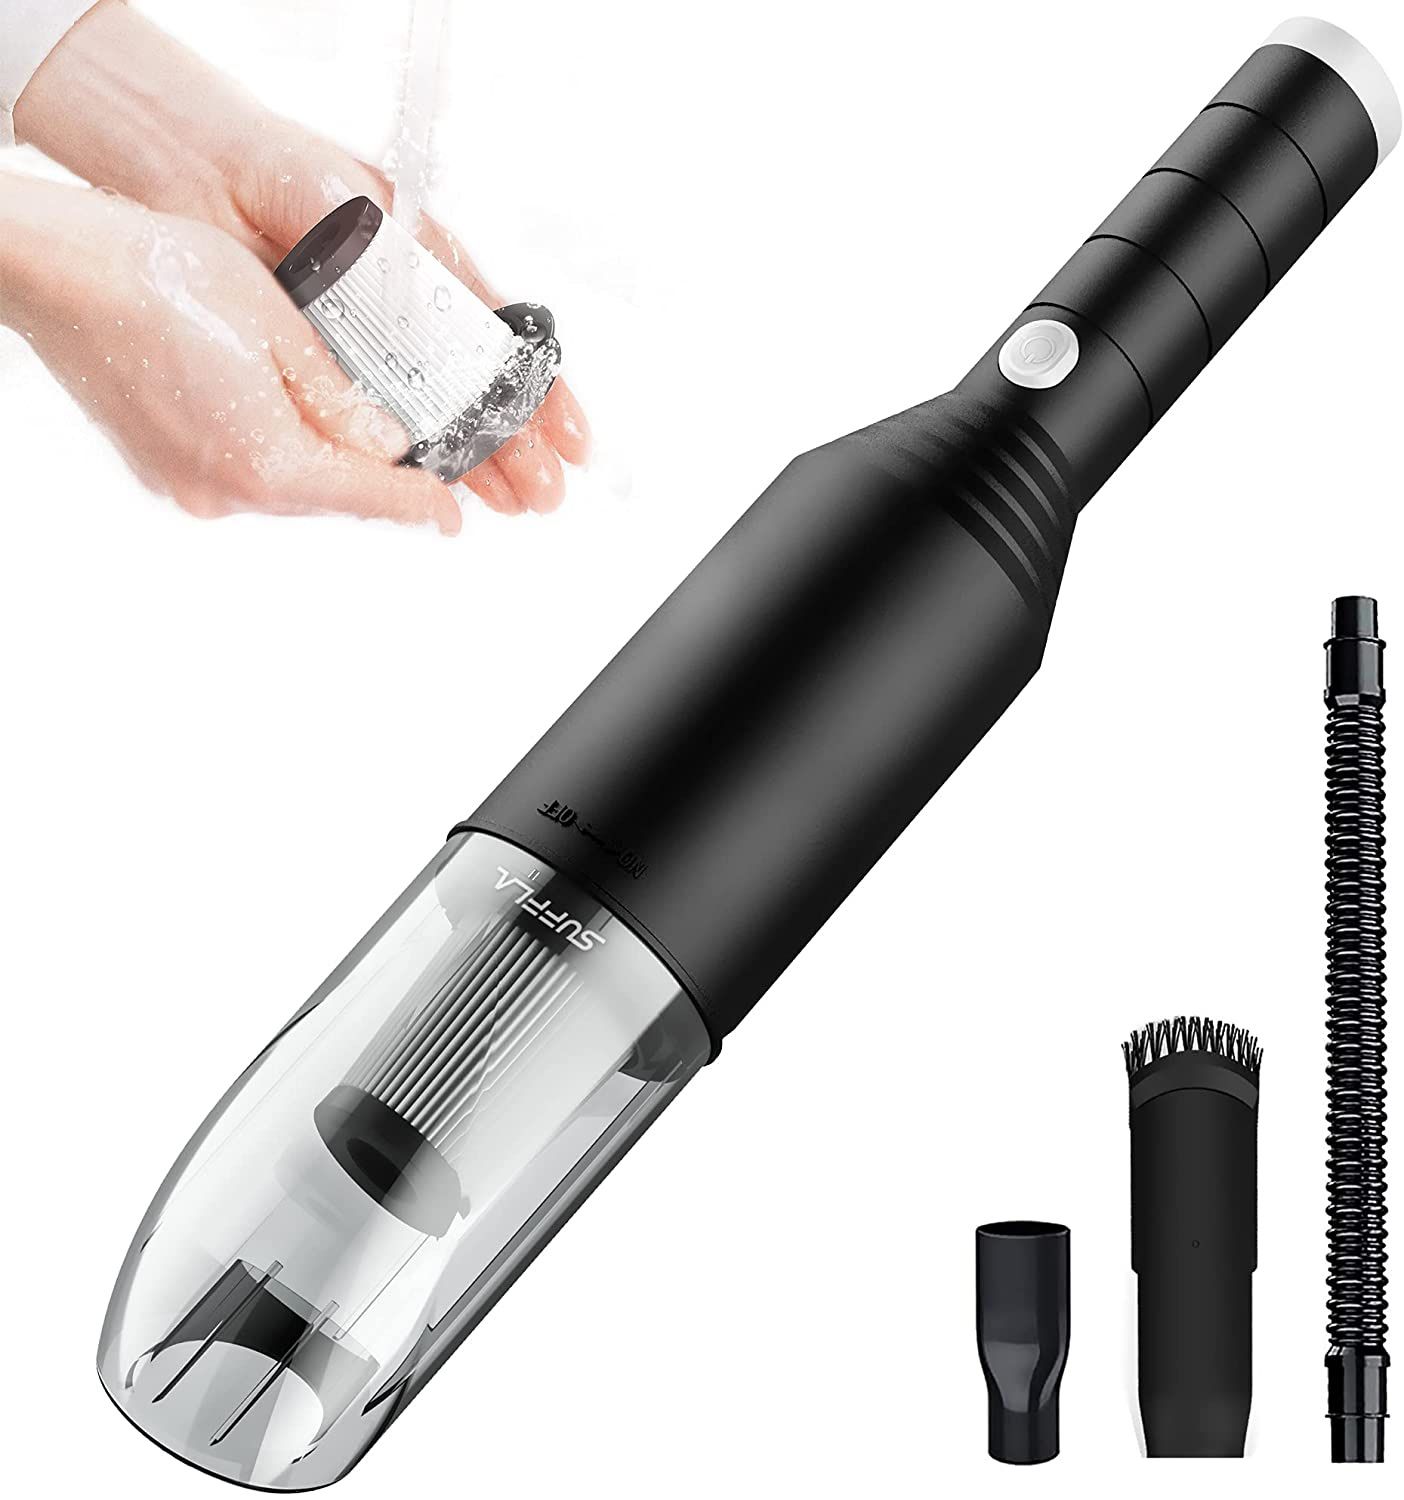 Car Handheld Vacuum Cleaner - Lightweight Portable Cordless - 6000PA Suction - 120W High Power & Quick Charge & HEPA Filter - for Car Carpet and Floor